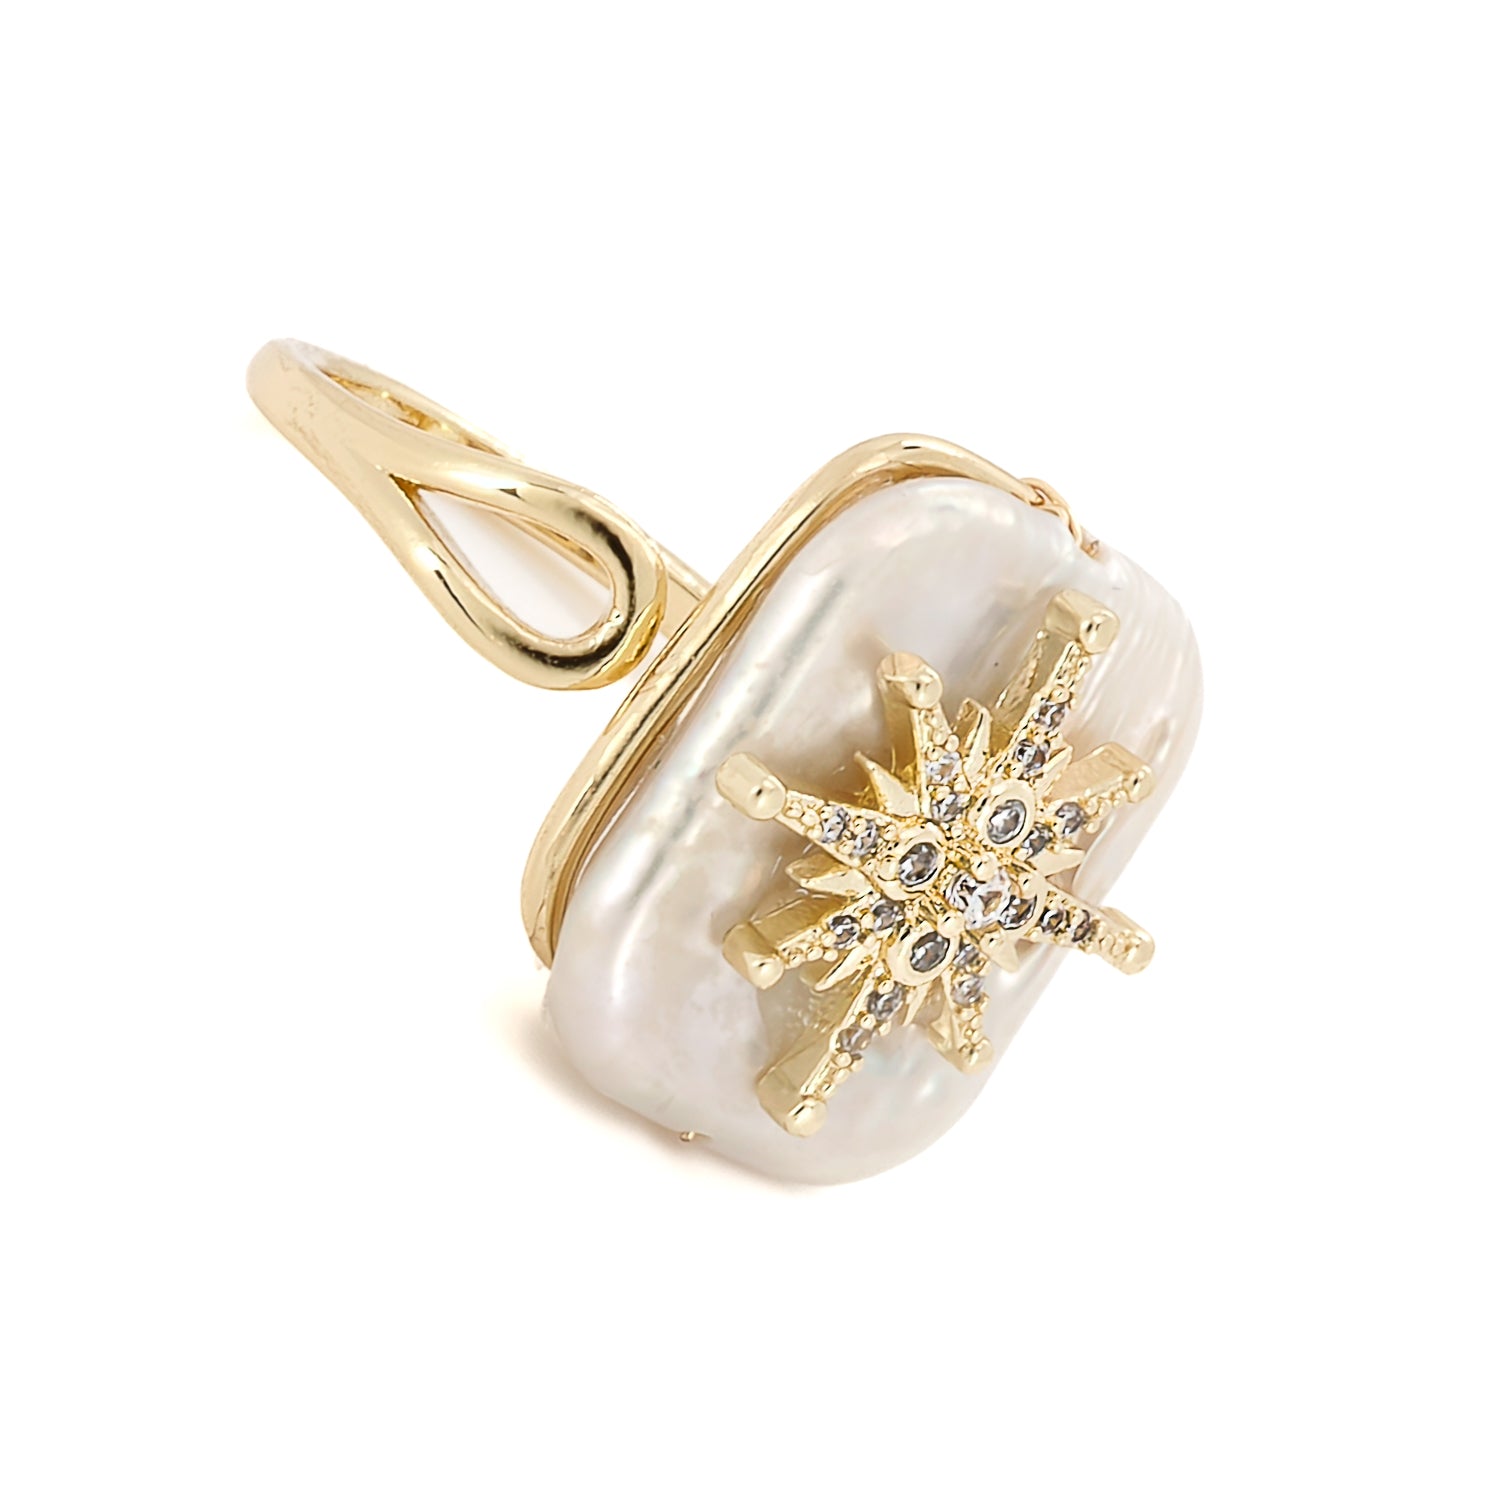 Cleopatra-inspired guidance ring with a lustrous pearl centerpiece.